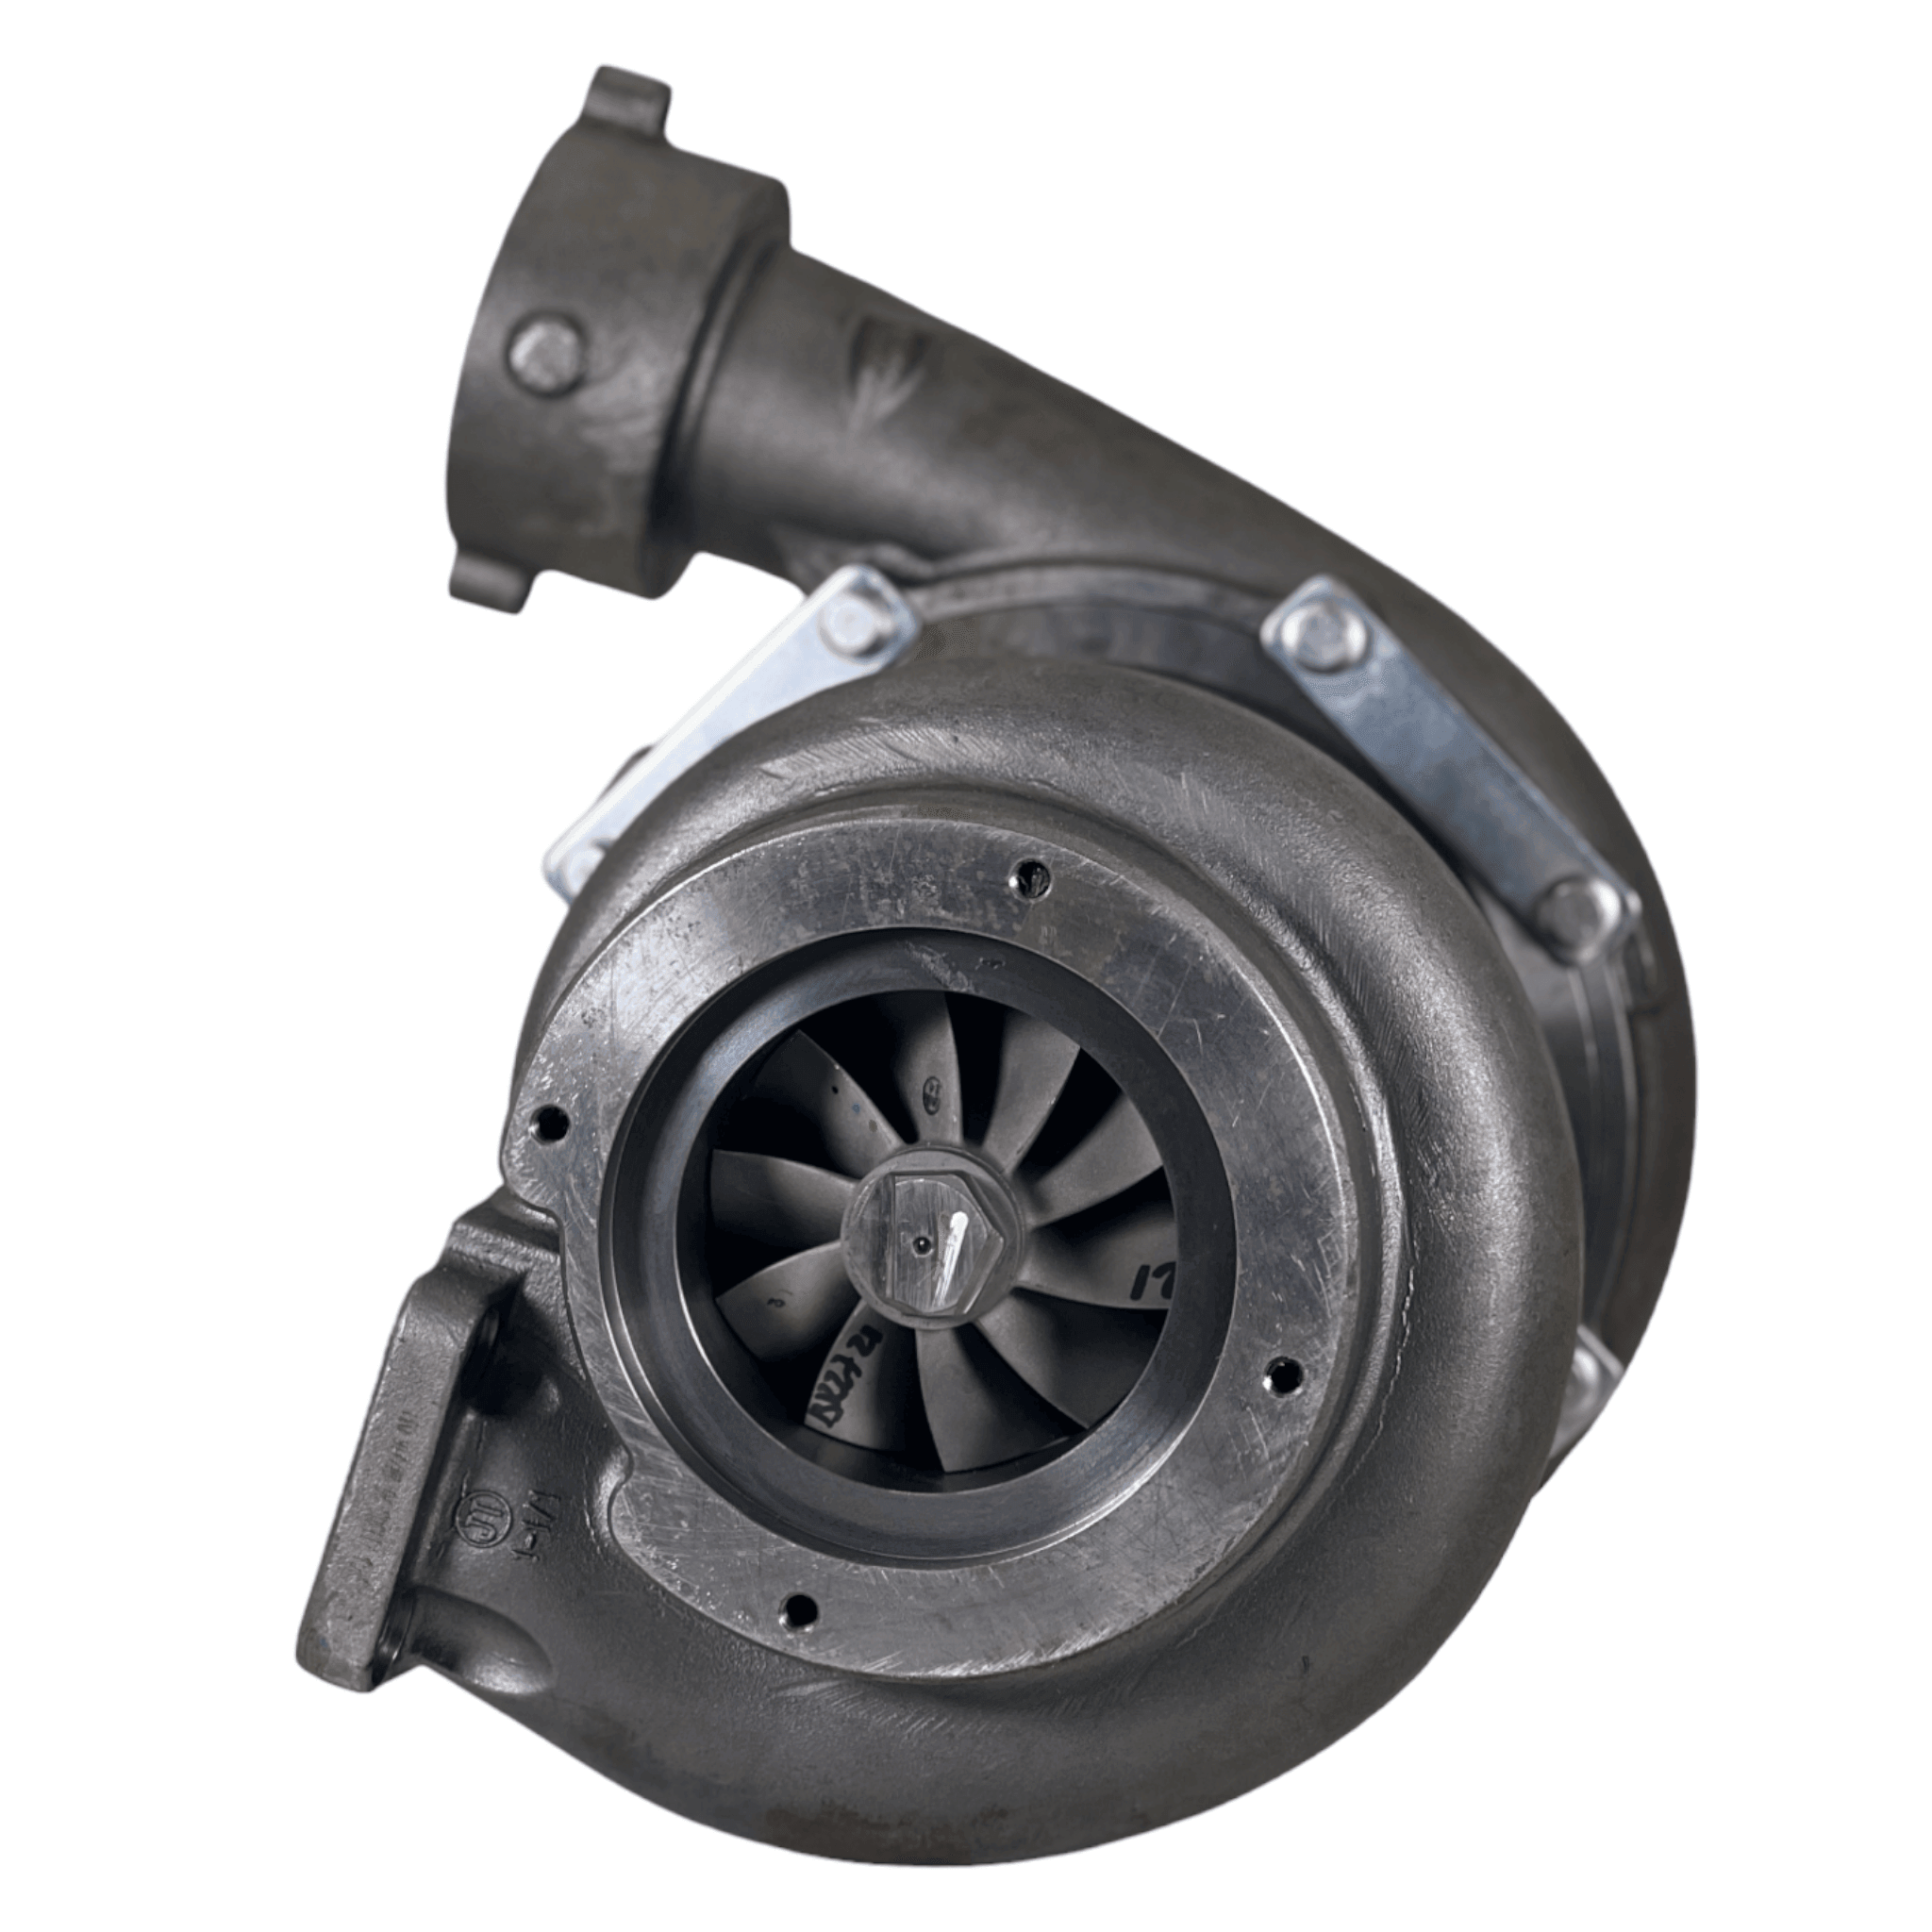 3930358 Genuine Cat Turbocharger For Caterpillar G3508/ G3516 Engines - ADVANCED TRUCK PARTS